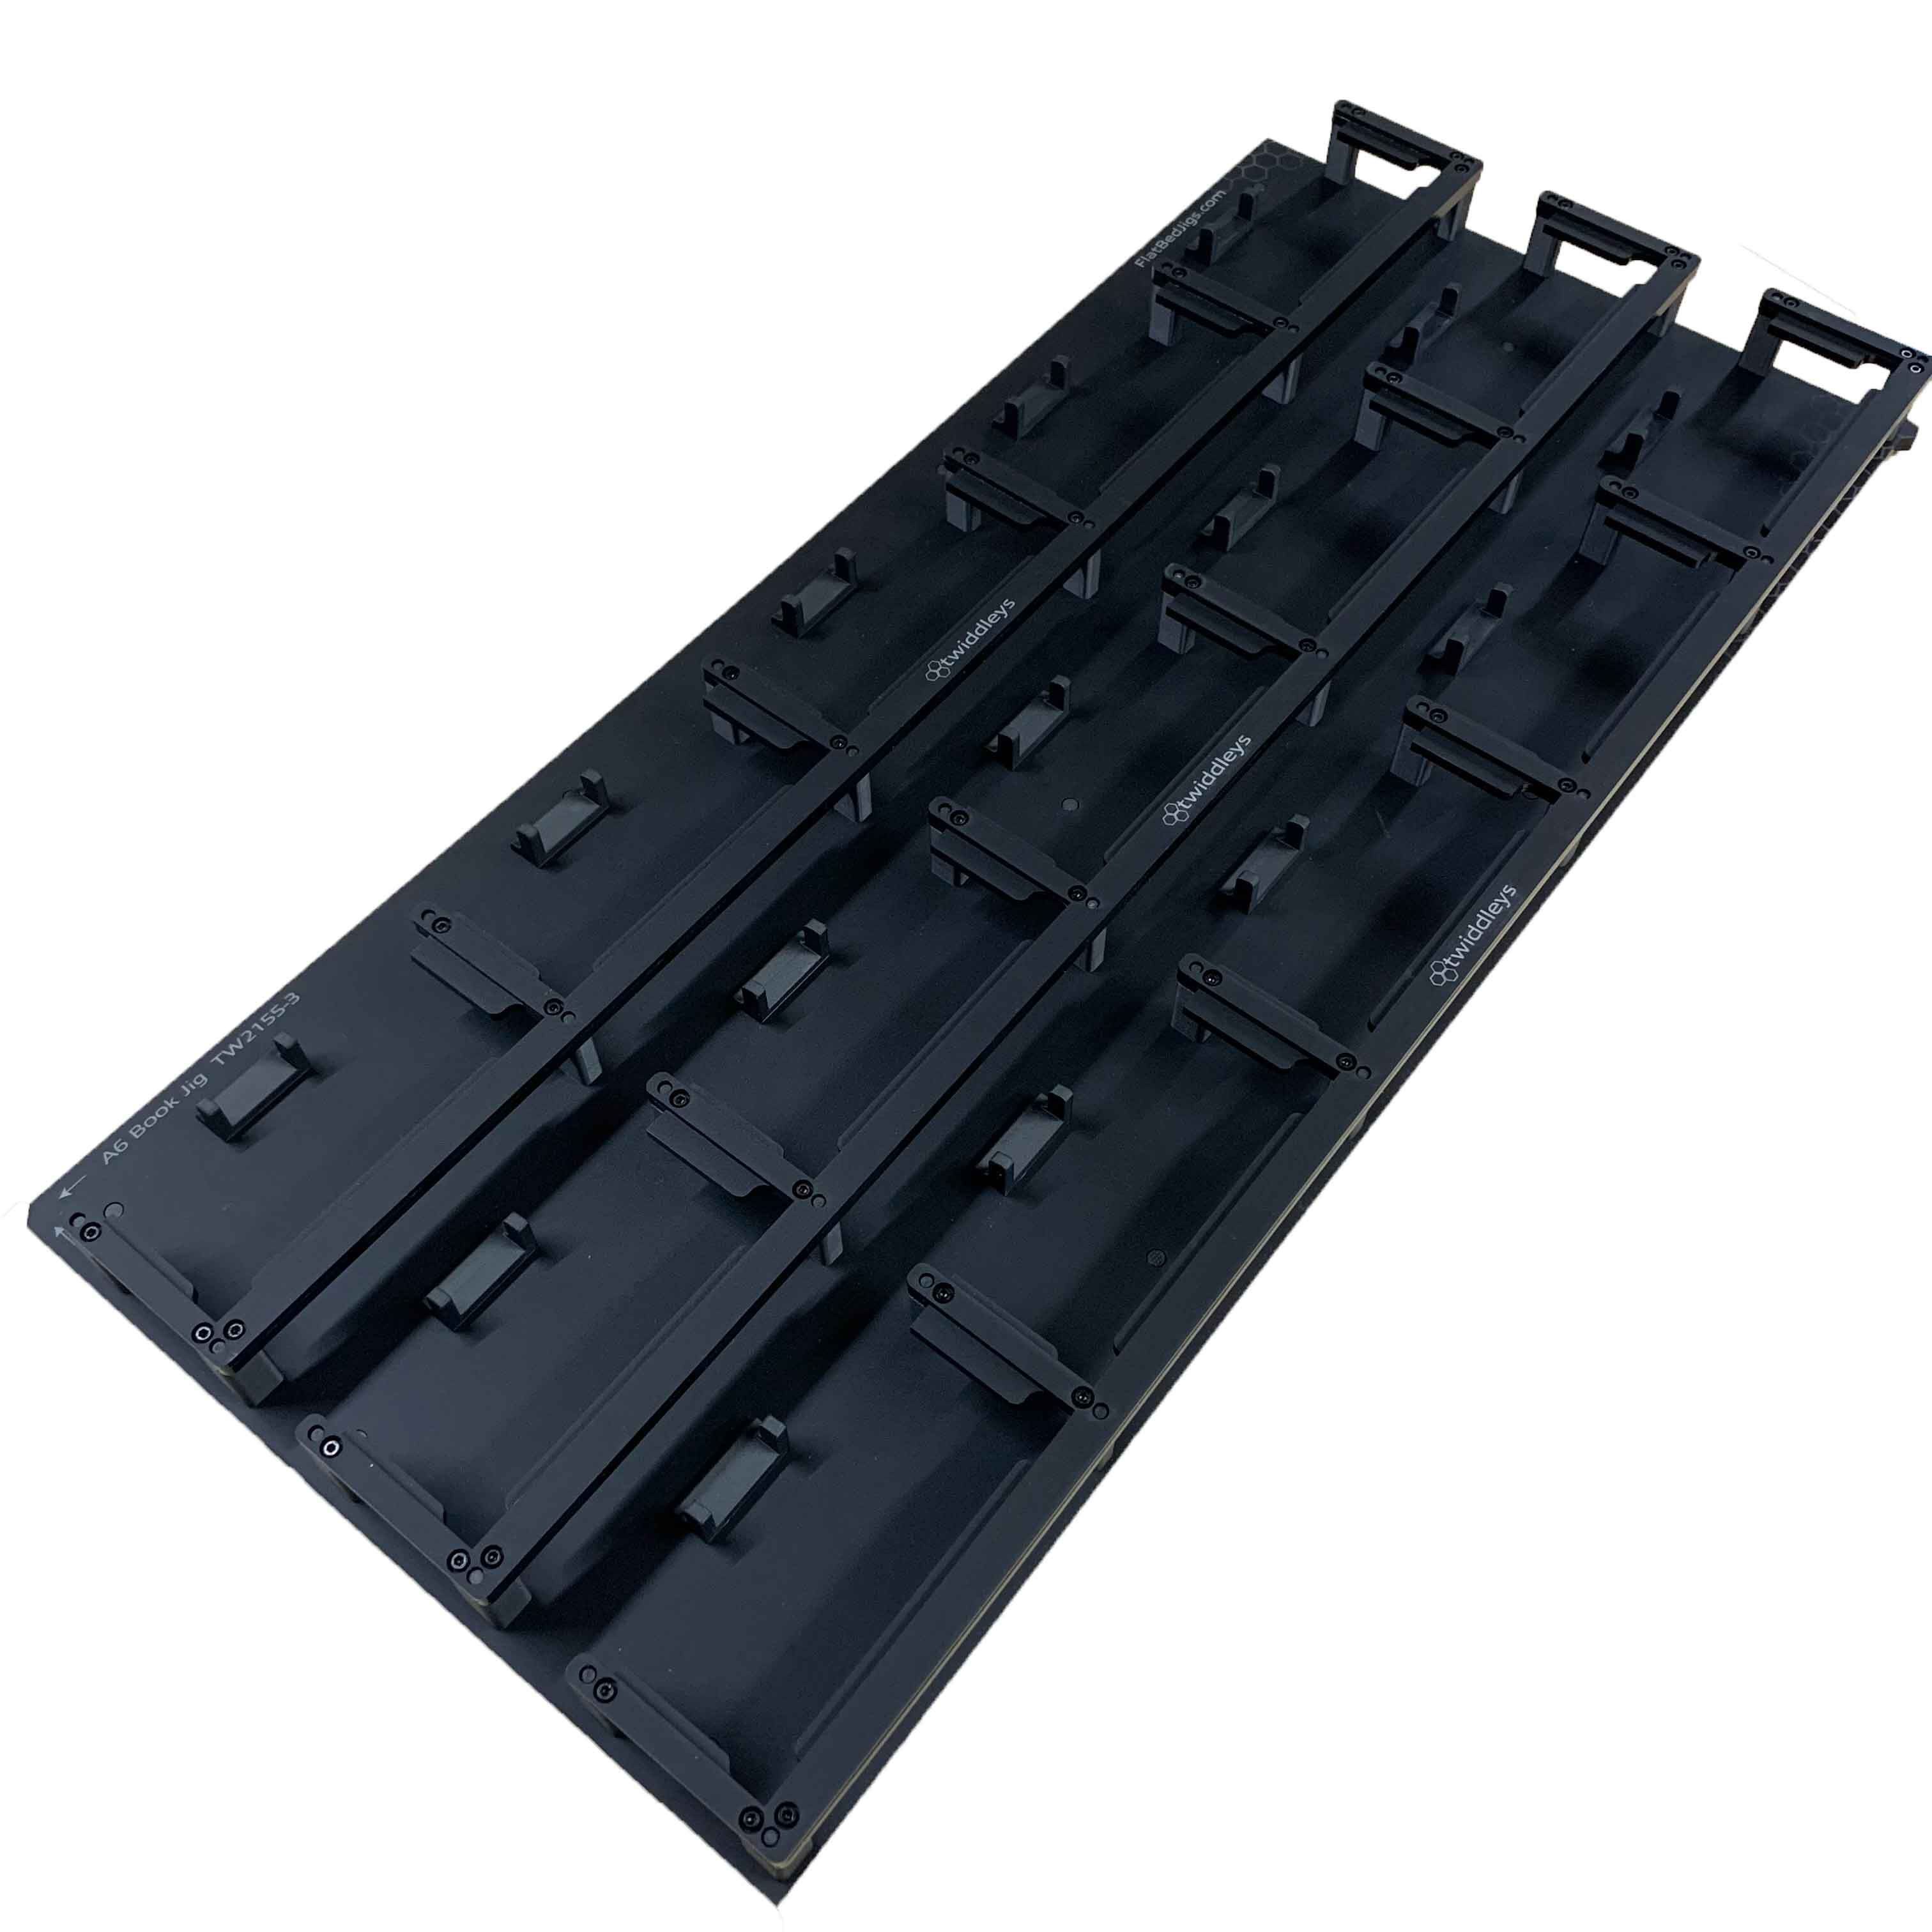 A6 Notebook Printing Jig for Roland BD-8 Flatbed Printer (1 Space)